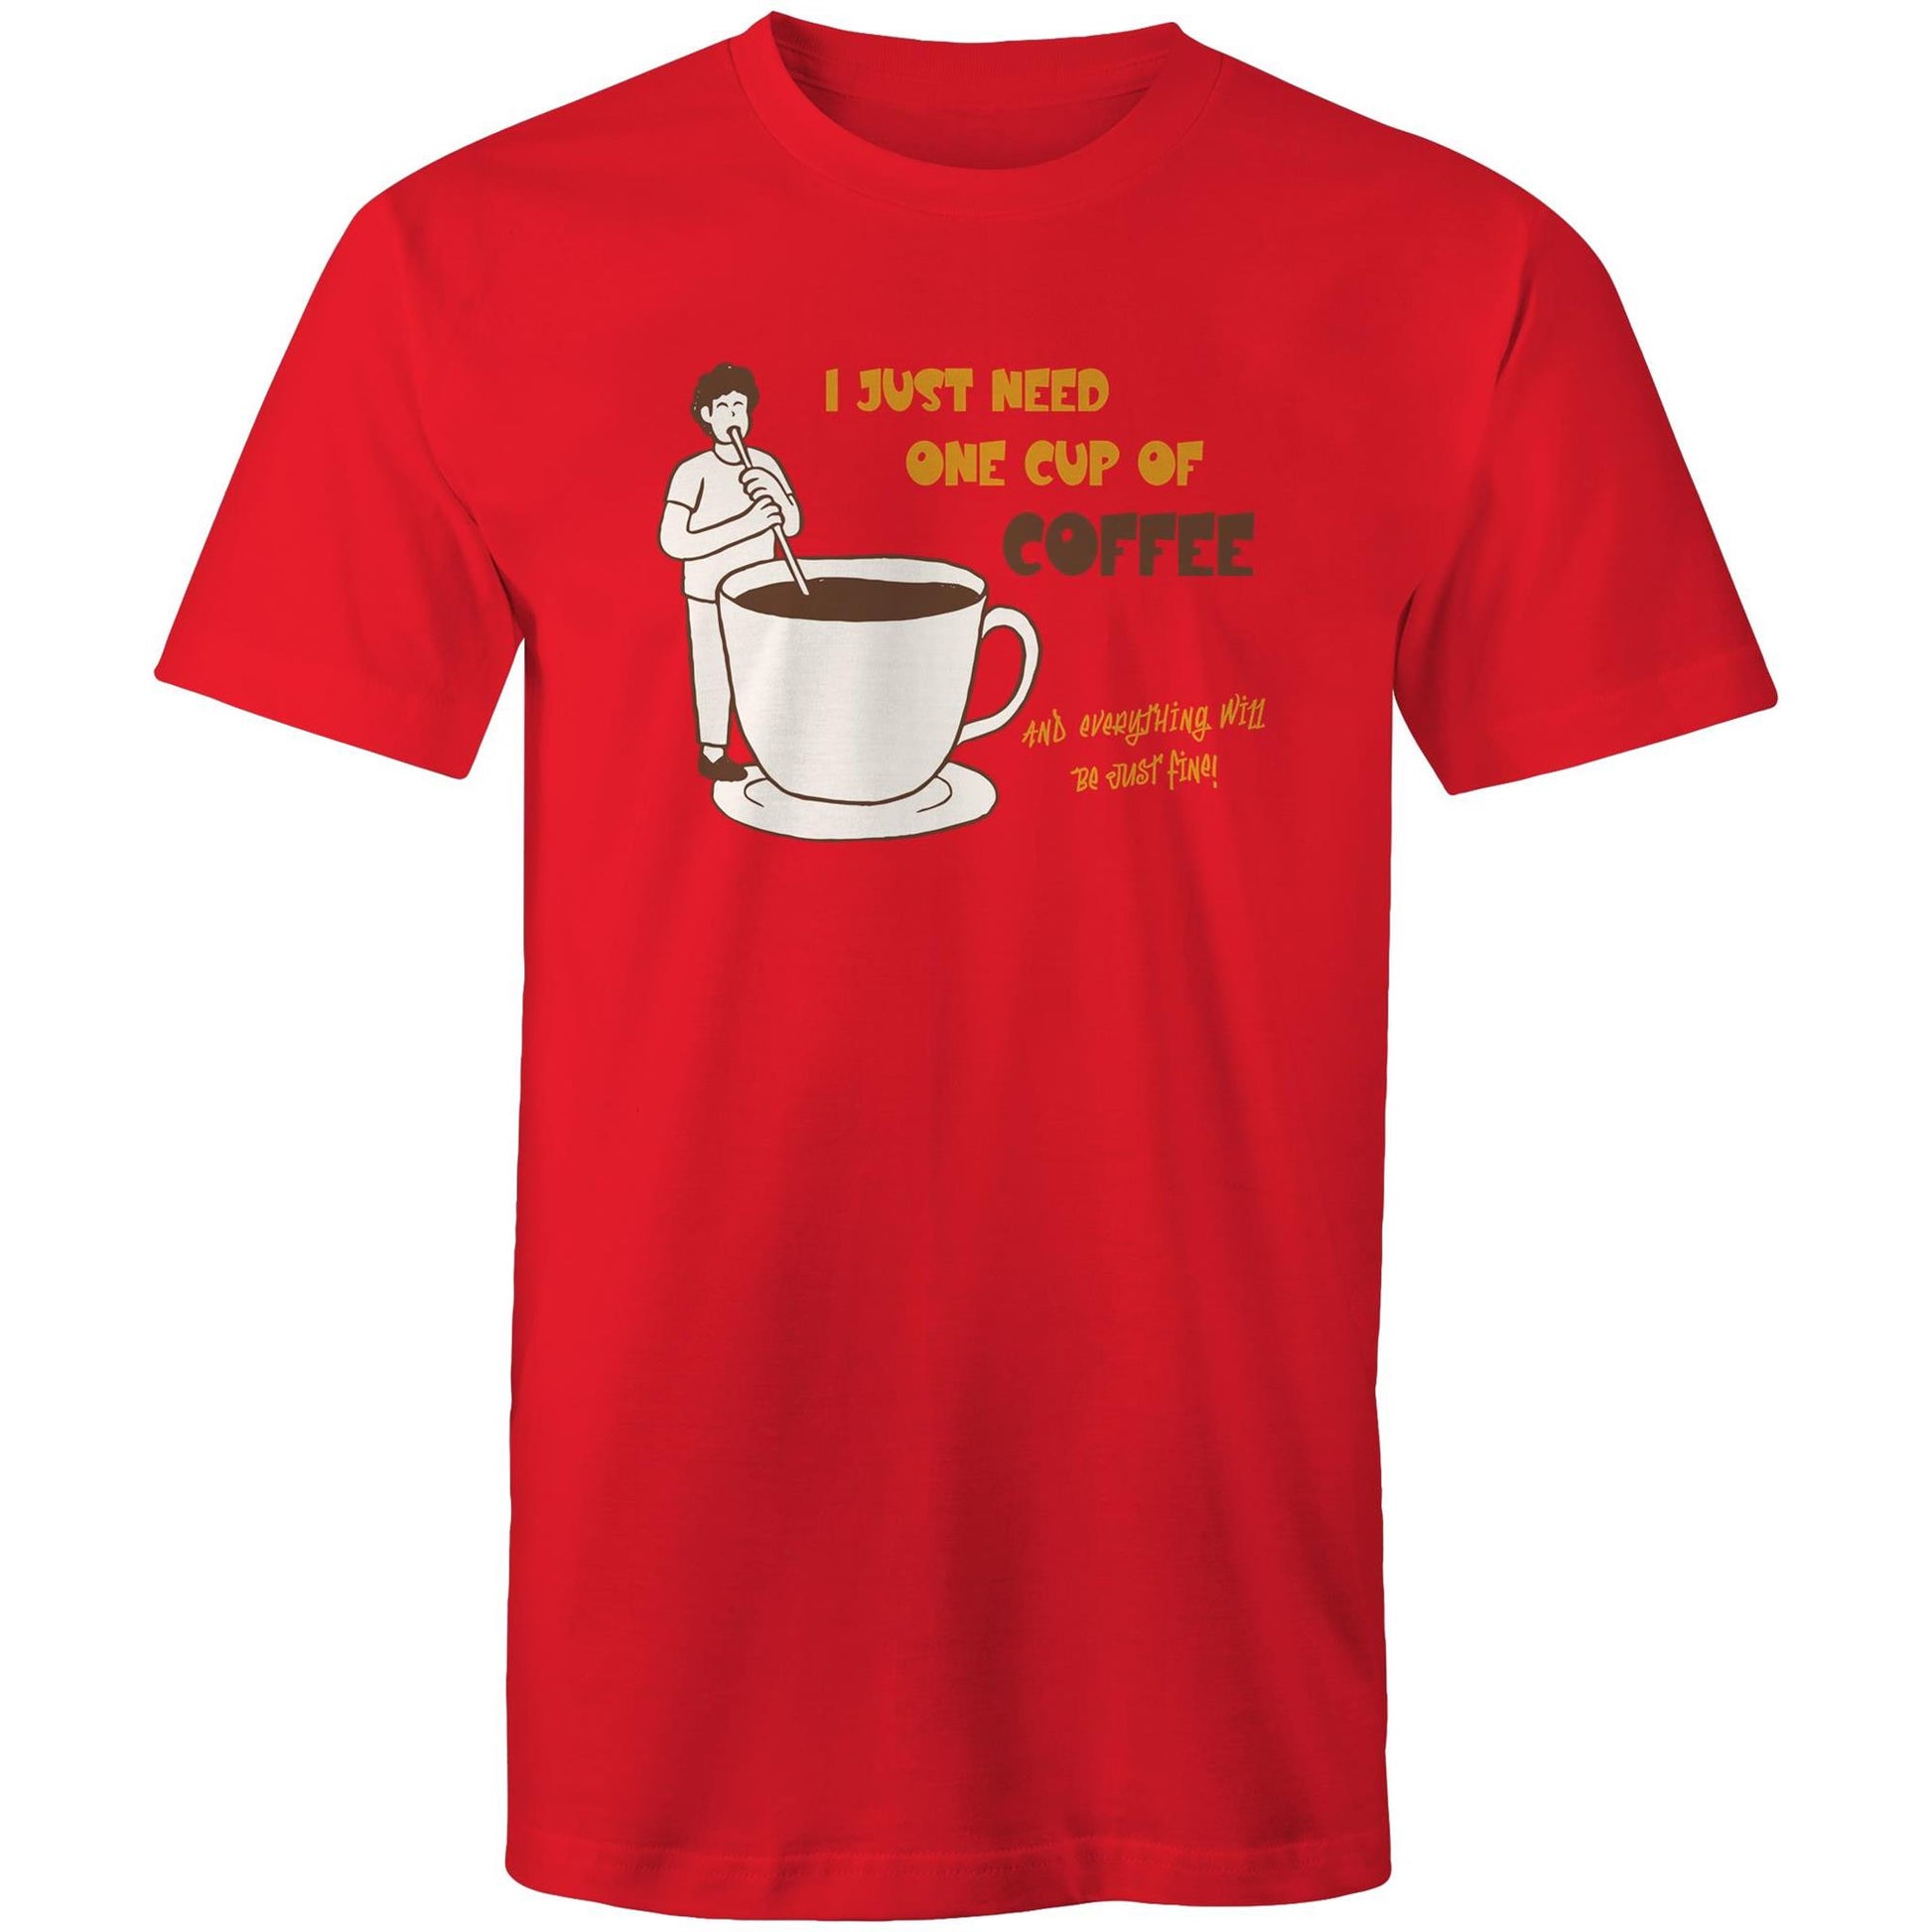 I Just Need One Cup Of Coffee And Everything Will Be Just Fine - Mens T-Shirt Red Mens T-shirt Coffee